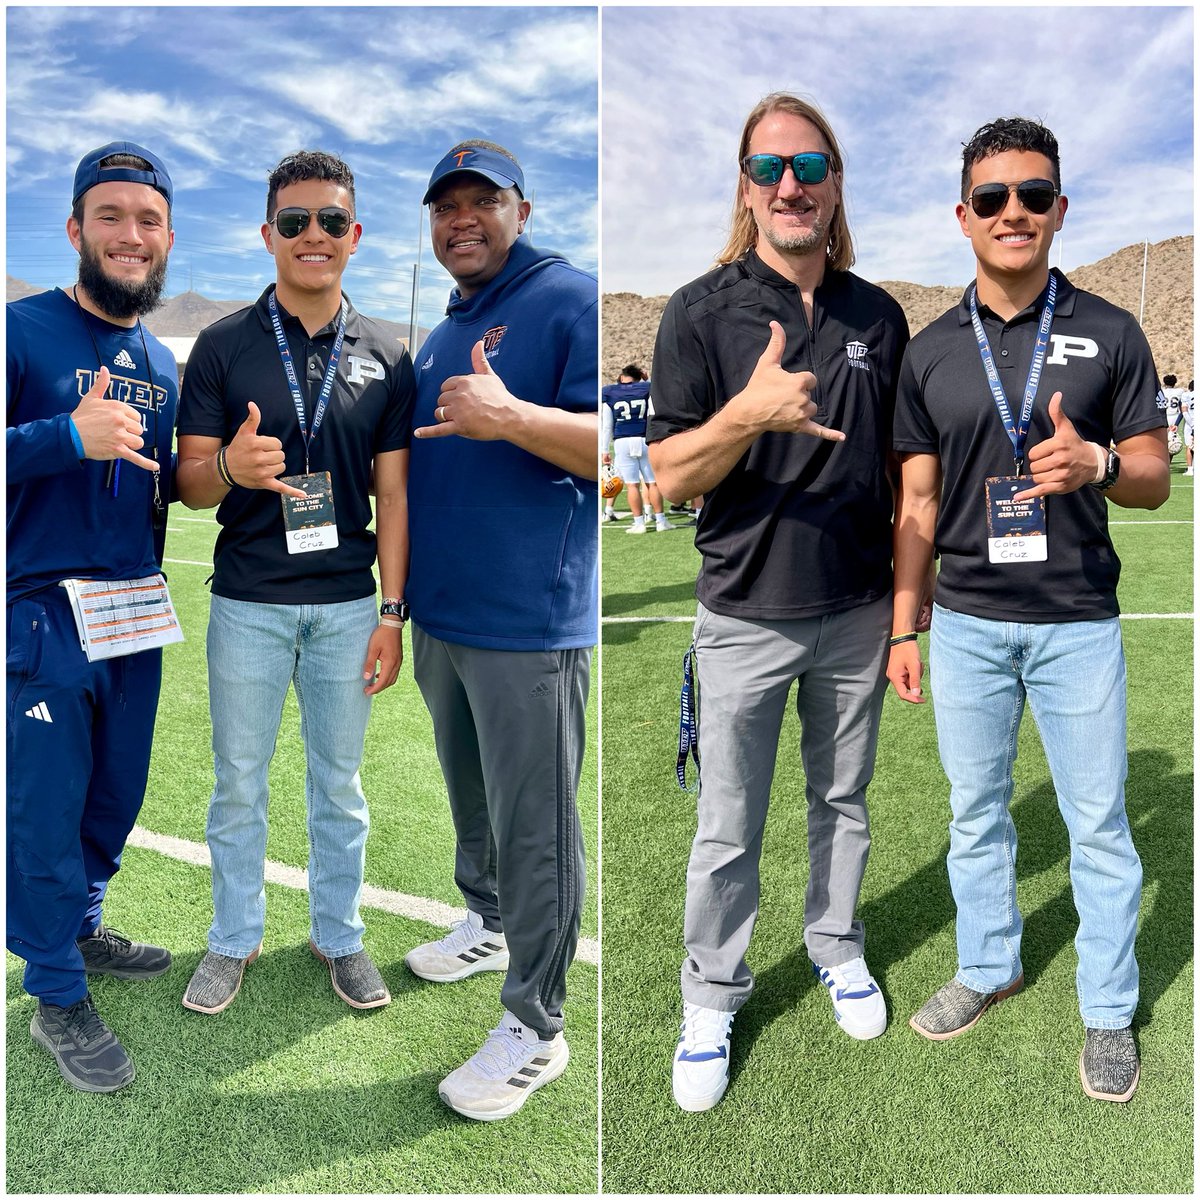 Appreciate the love shown today to me and my dad at @UTEPFB by all the staff and team. Lots of energy all over the field. Truly grateful and look forward to talking and seeing everyone again soon! 🤞🏽💯⛏️ @CoachSWUTEP @CoachFoster23 @CoachjjClark @UTEPCoachCJones @CoachChadJ…